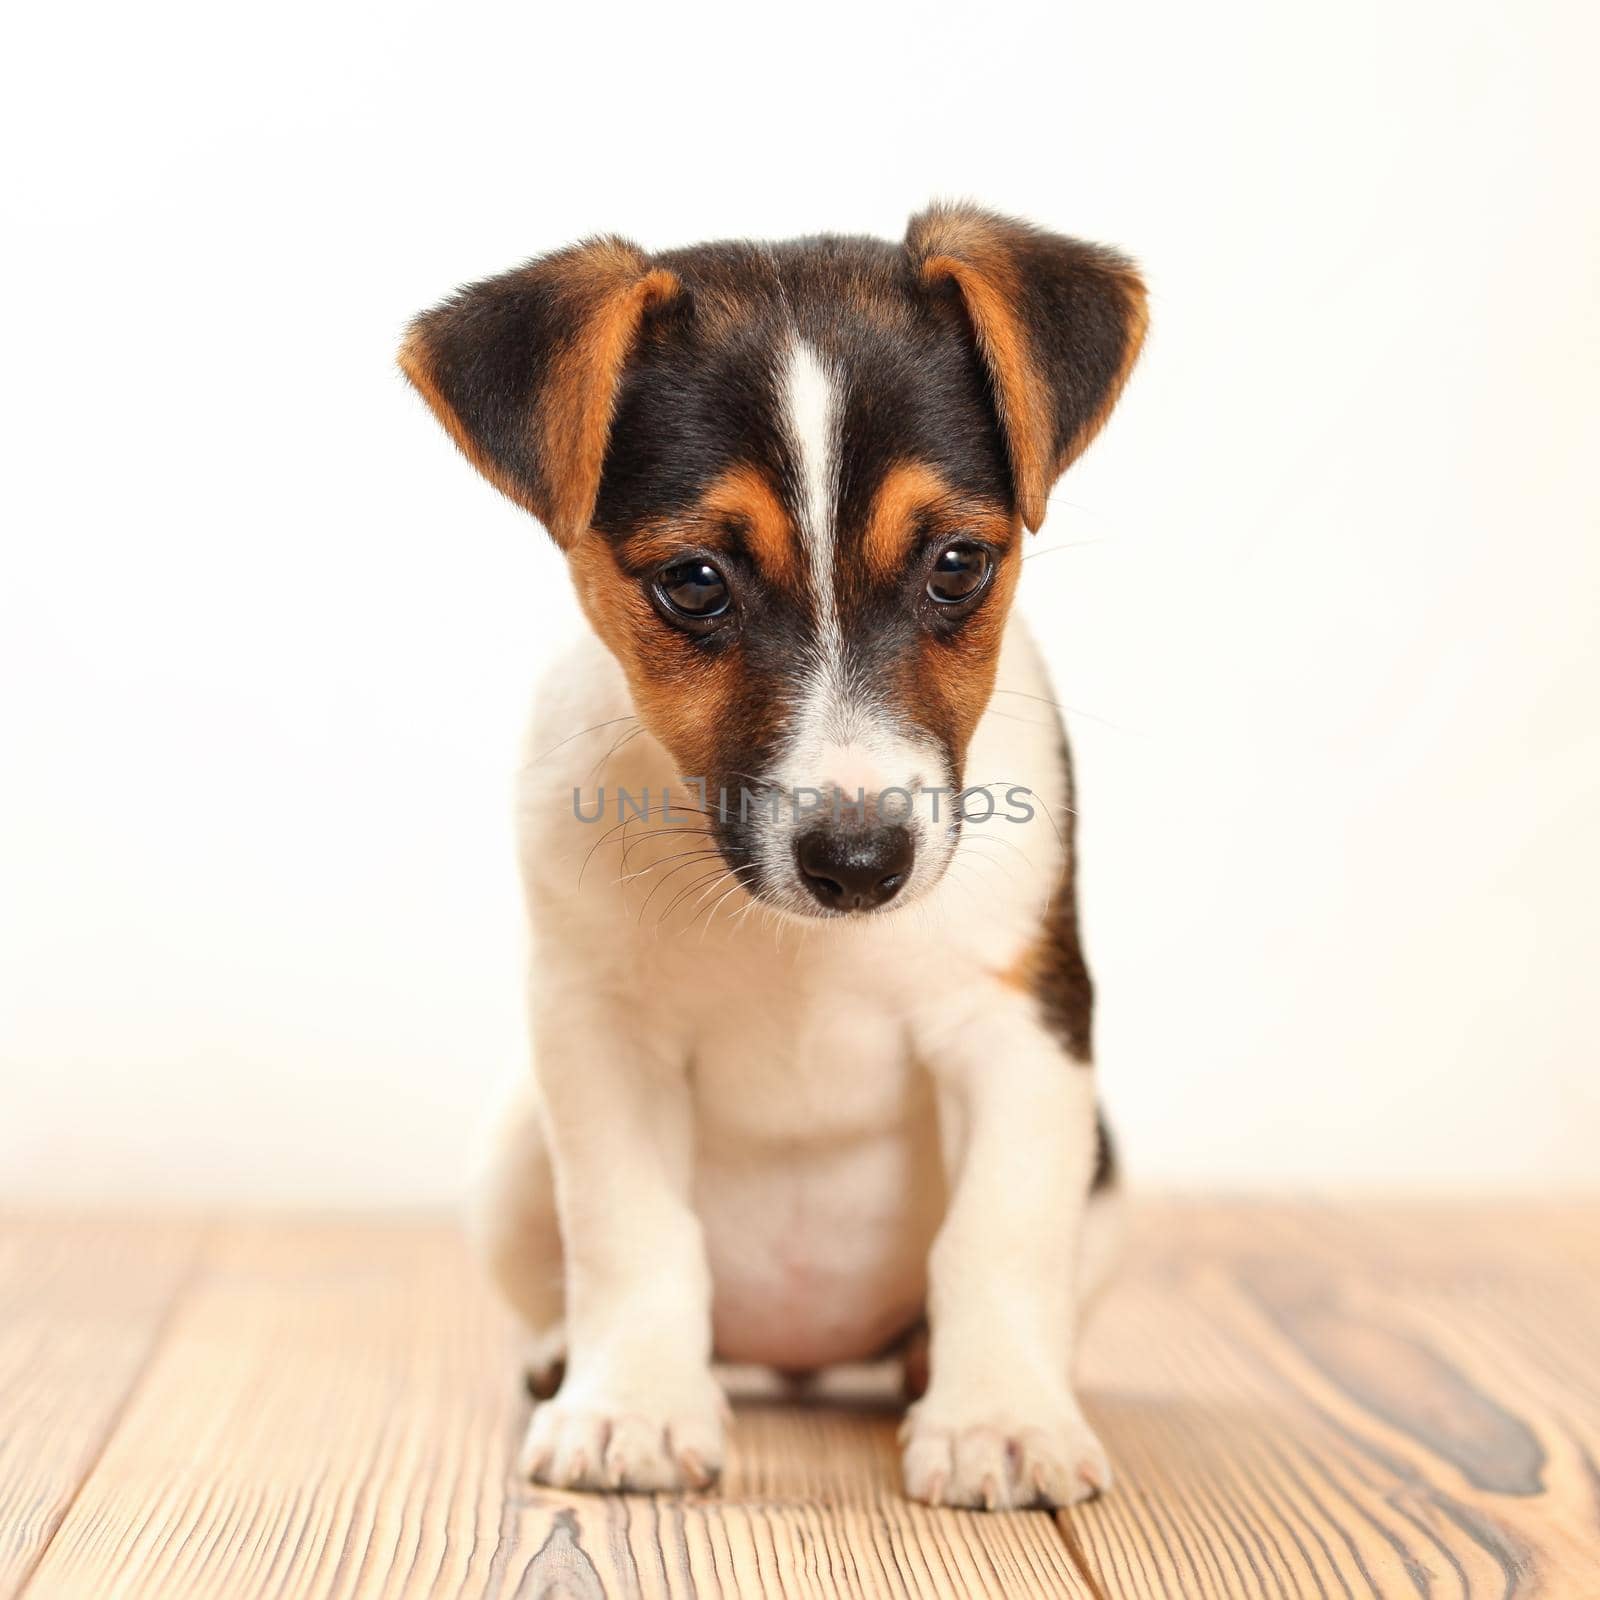 Jack Russell terrier puppy standing on wooden boards, white background, studio shot. by Ivanko